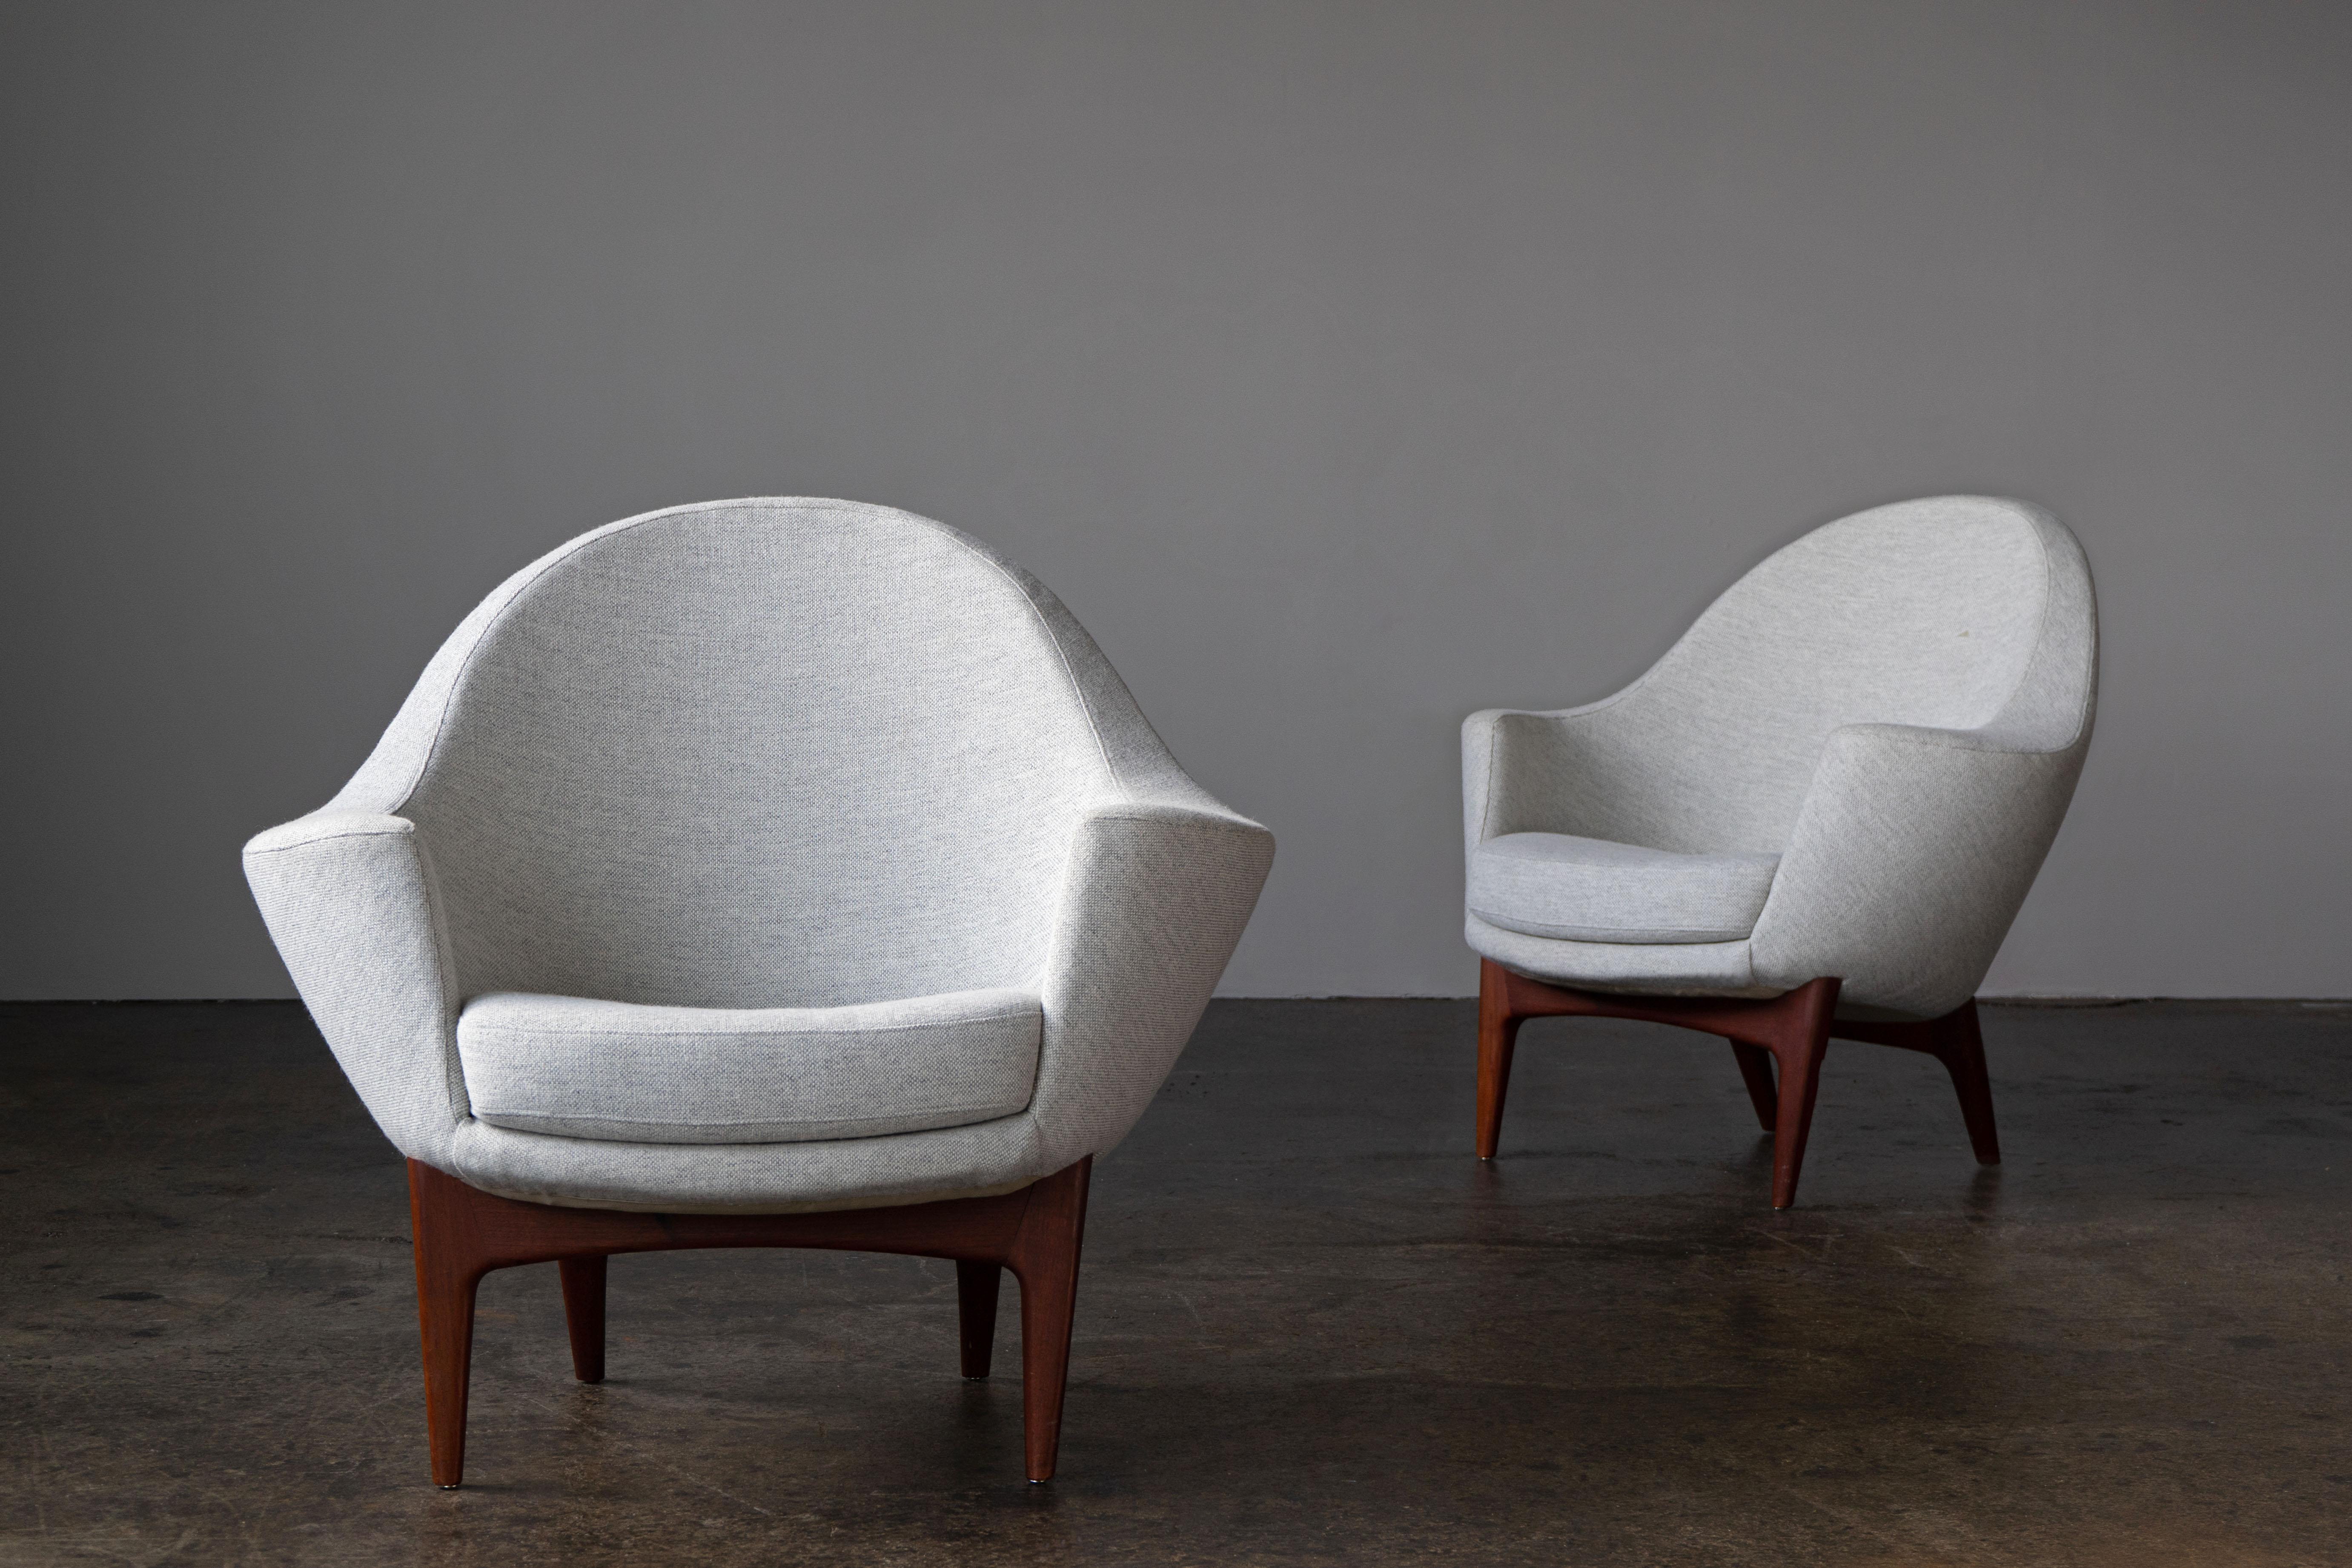 Rare Pair of Lounge Chairs by Ib Kofod Larsen for Fritz Hansen, 1959 In Good Condition For Sale In Rosendahl, DE